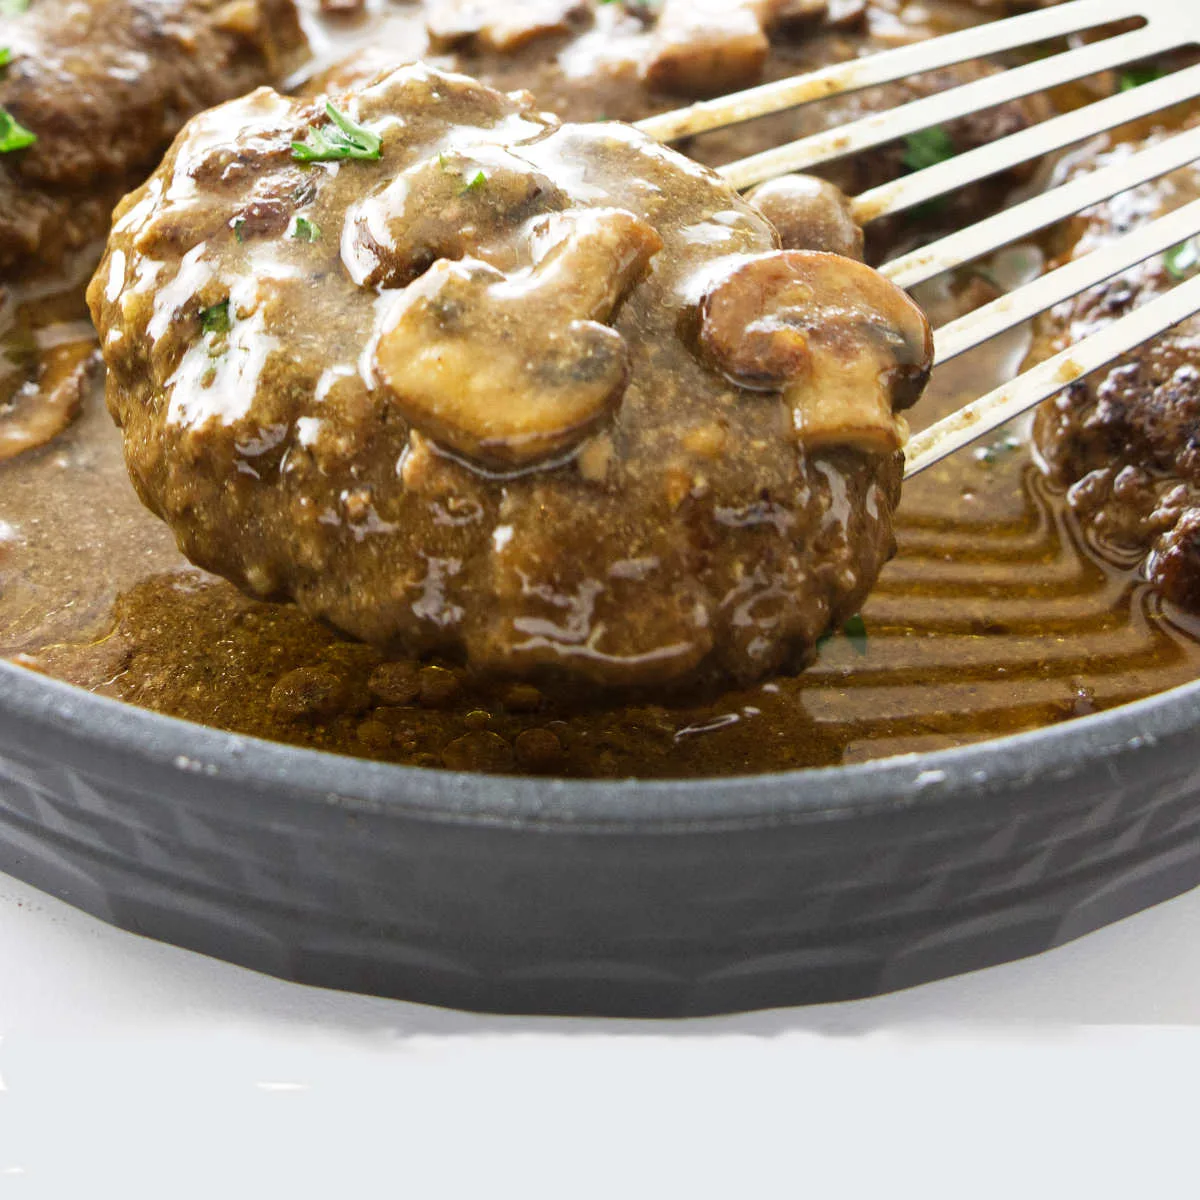 A spatula removing a Salisbury steak from a skillet.